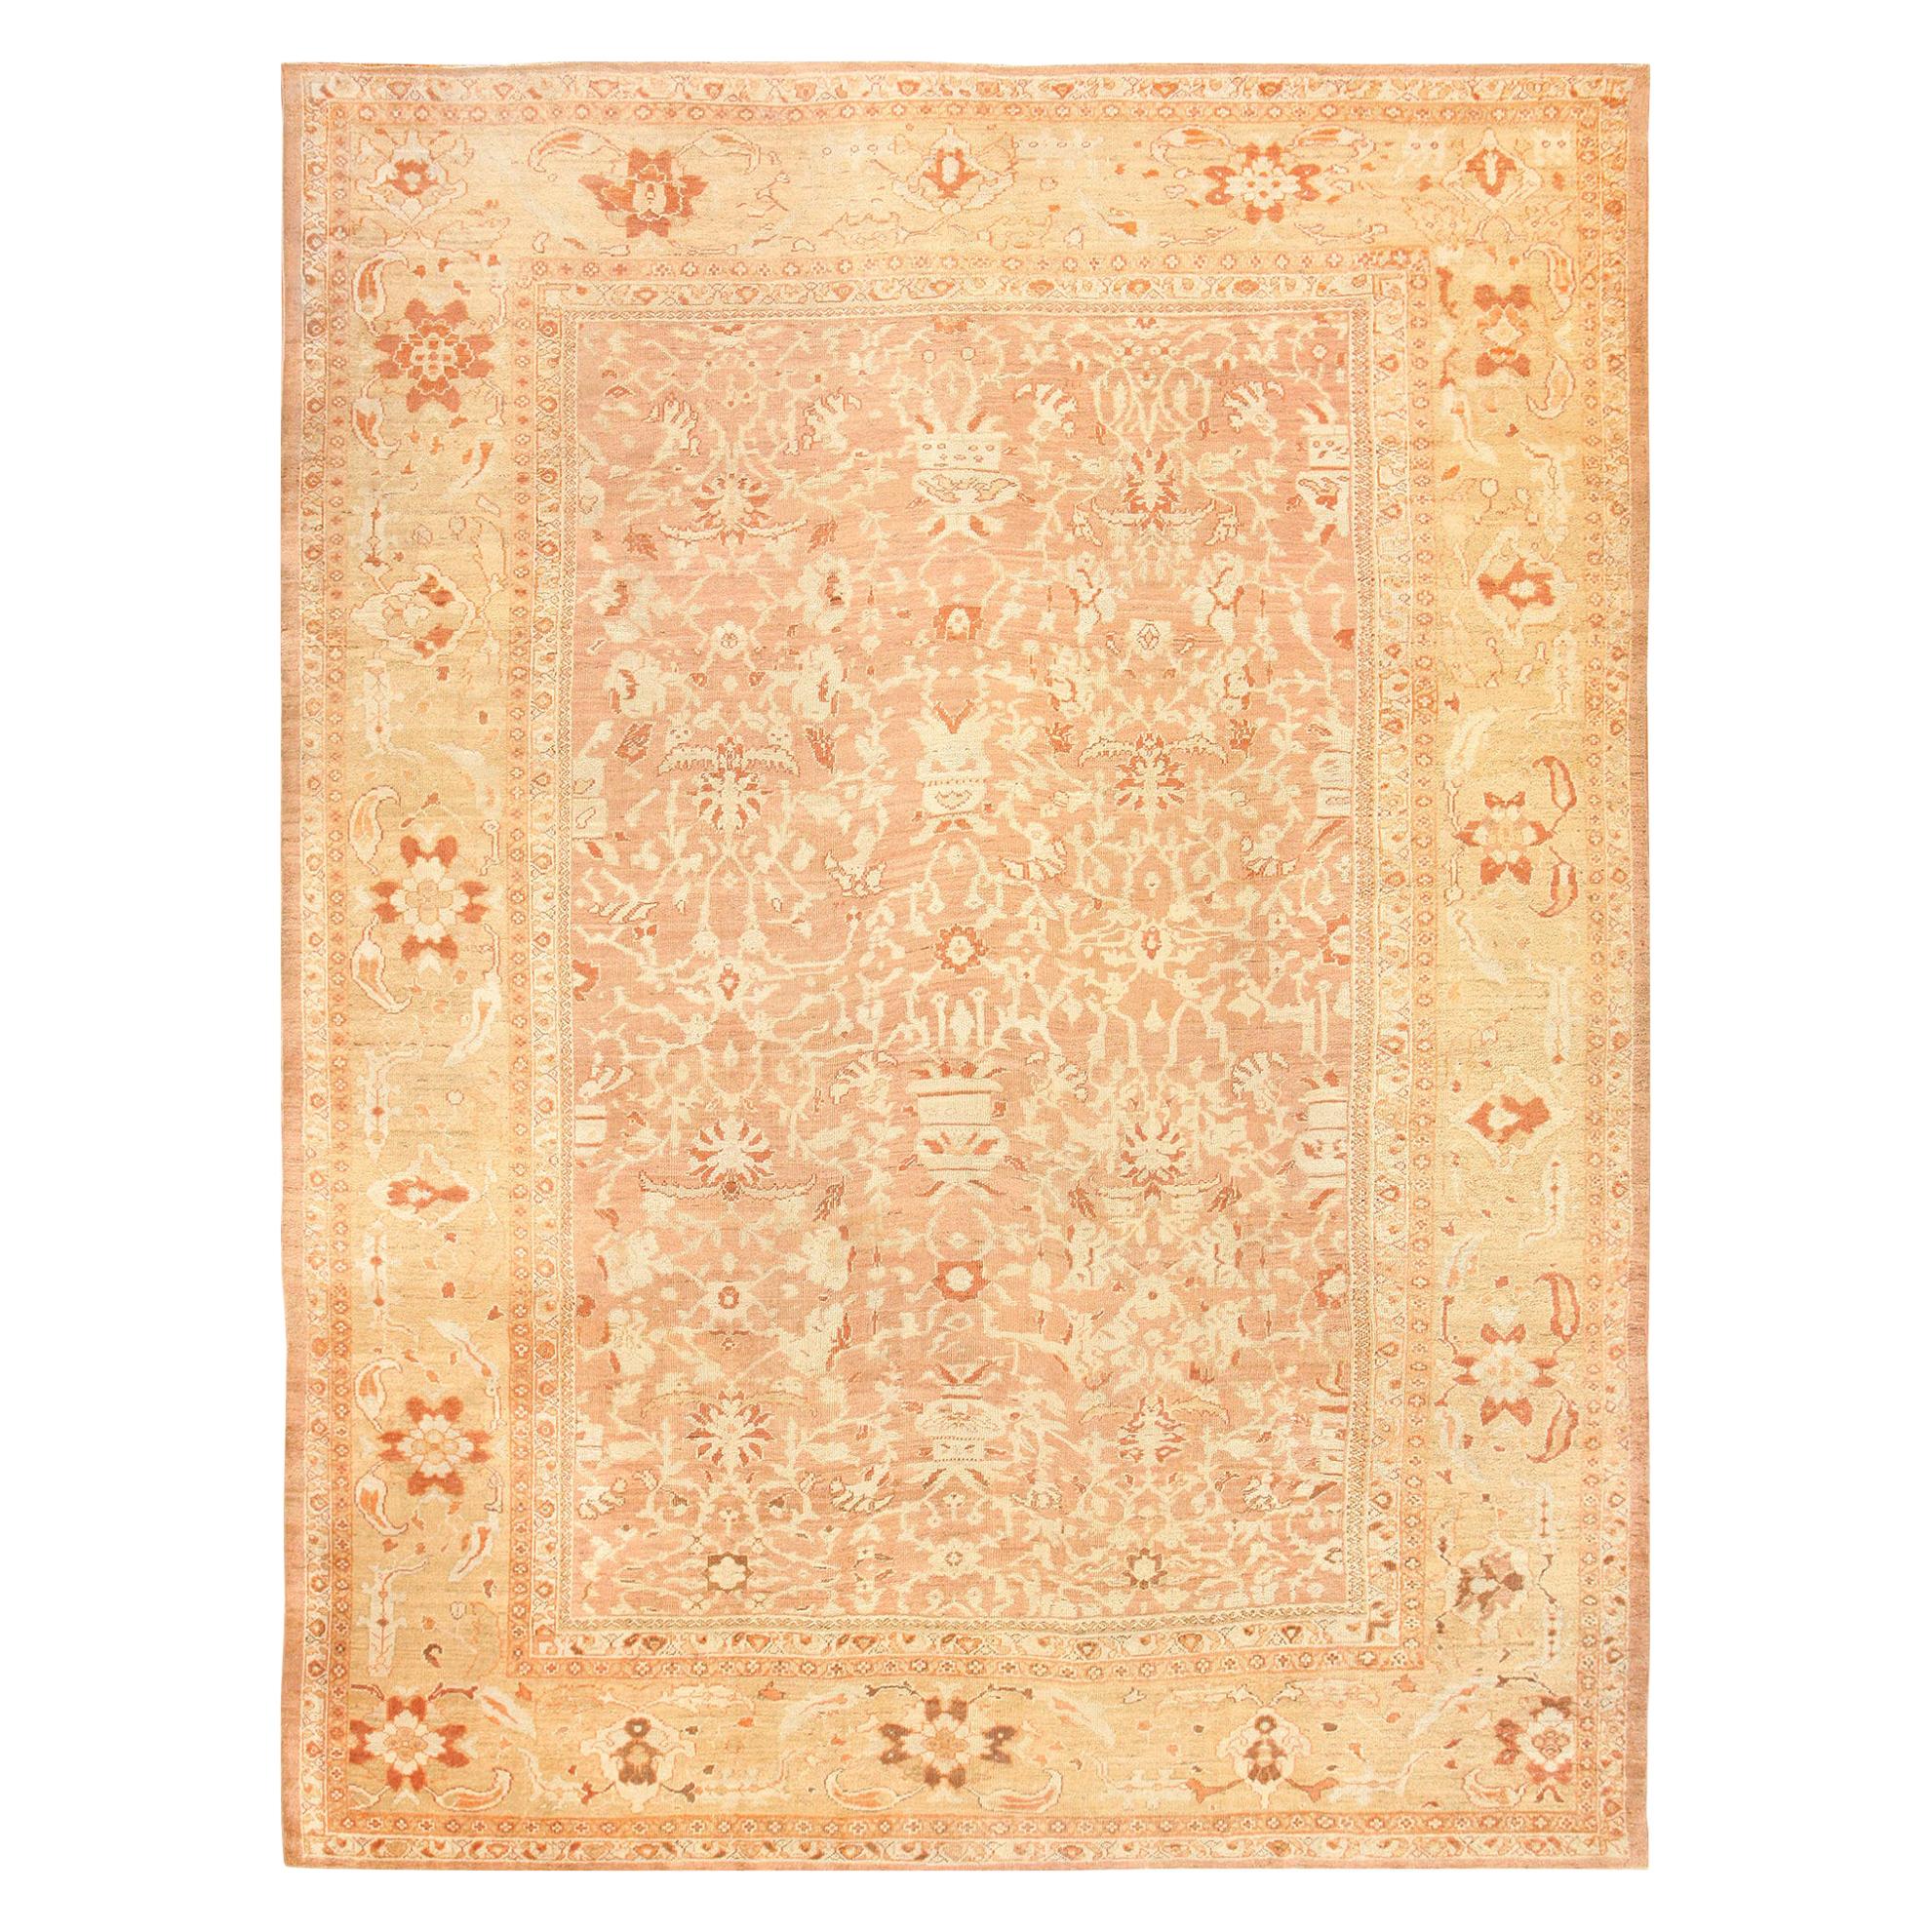 Nazmiyal Decorative Antique Persian Ziegler Sultanabad Rug. Size: 11 ft x 15 ft For Sale